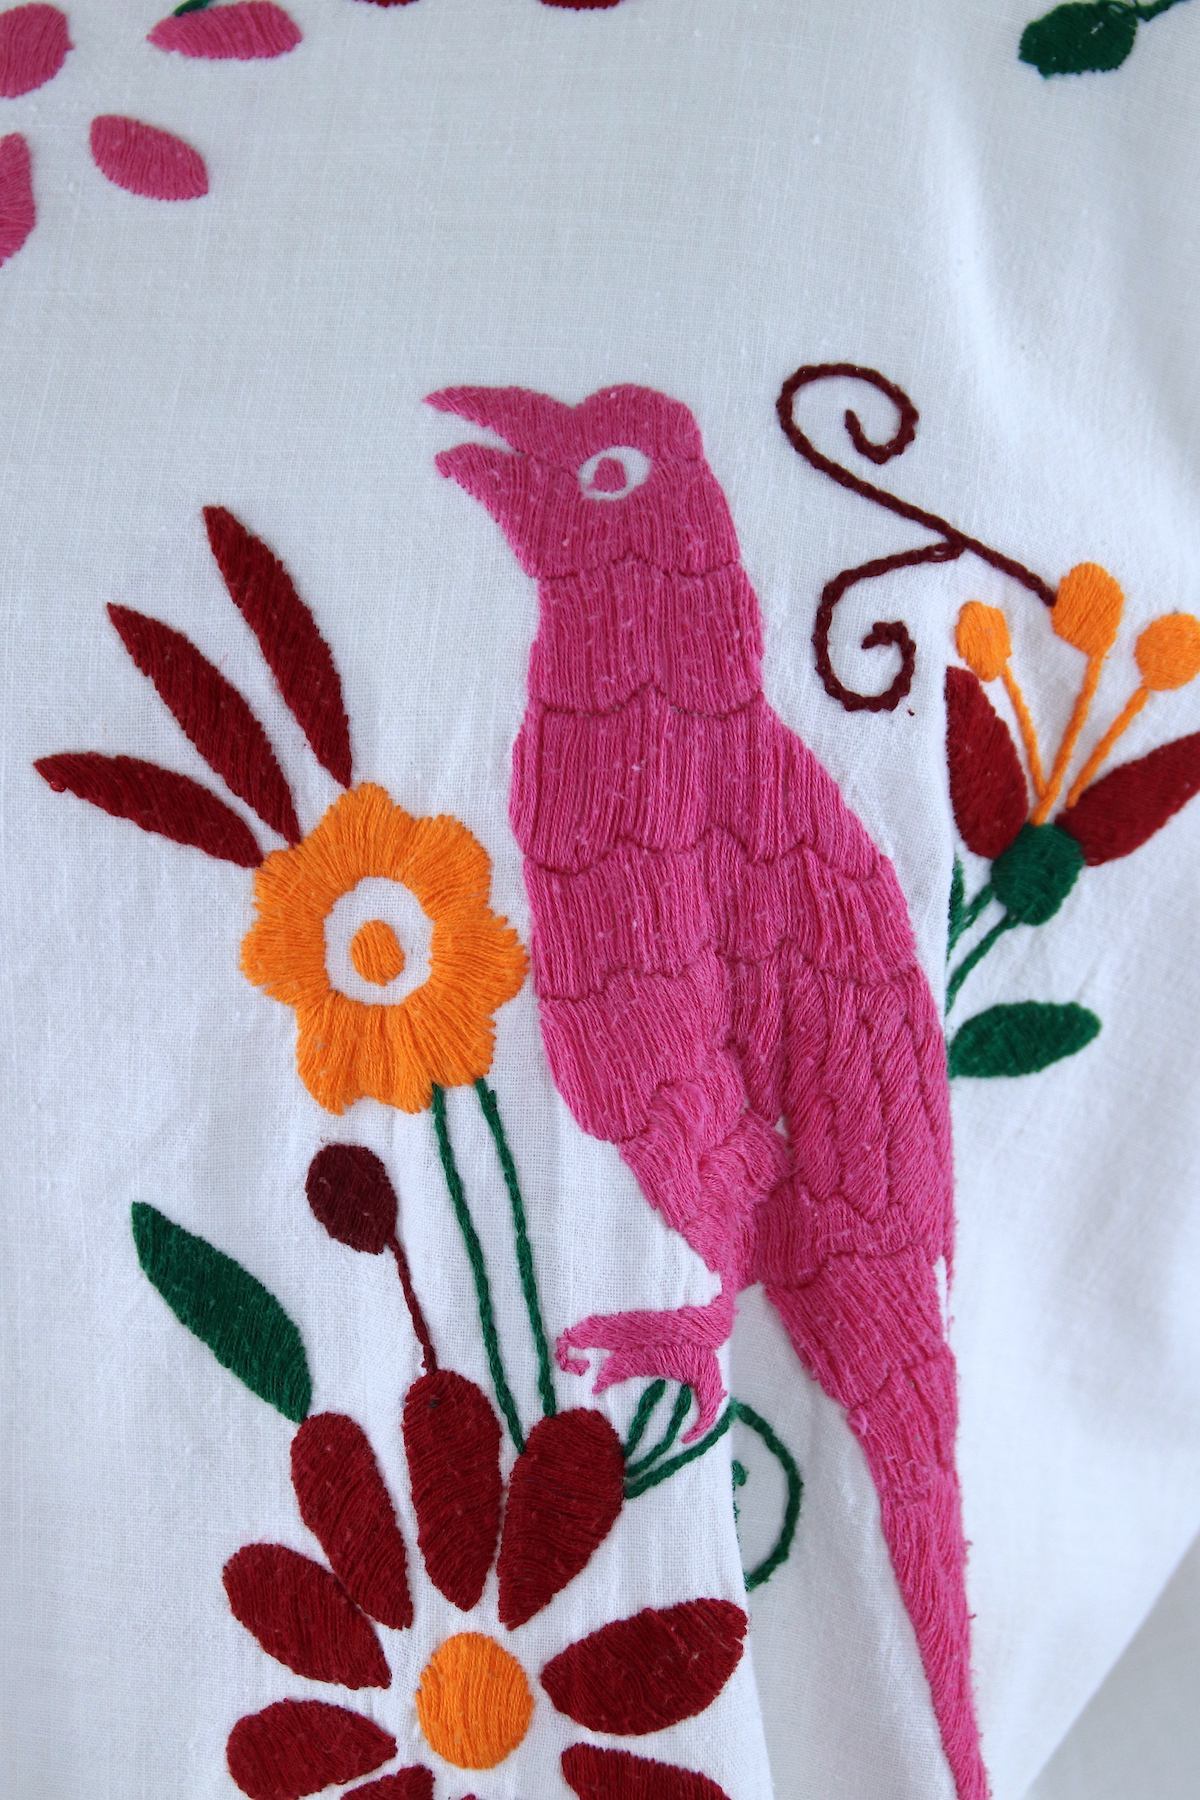 Vintage 1970s Oaxacan Mexican Embroidered Cotton Gauze Caftan Dress / White & Pink Parrots - ThisBlueBird